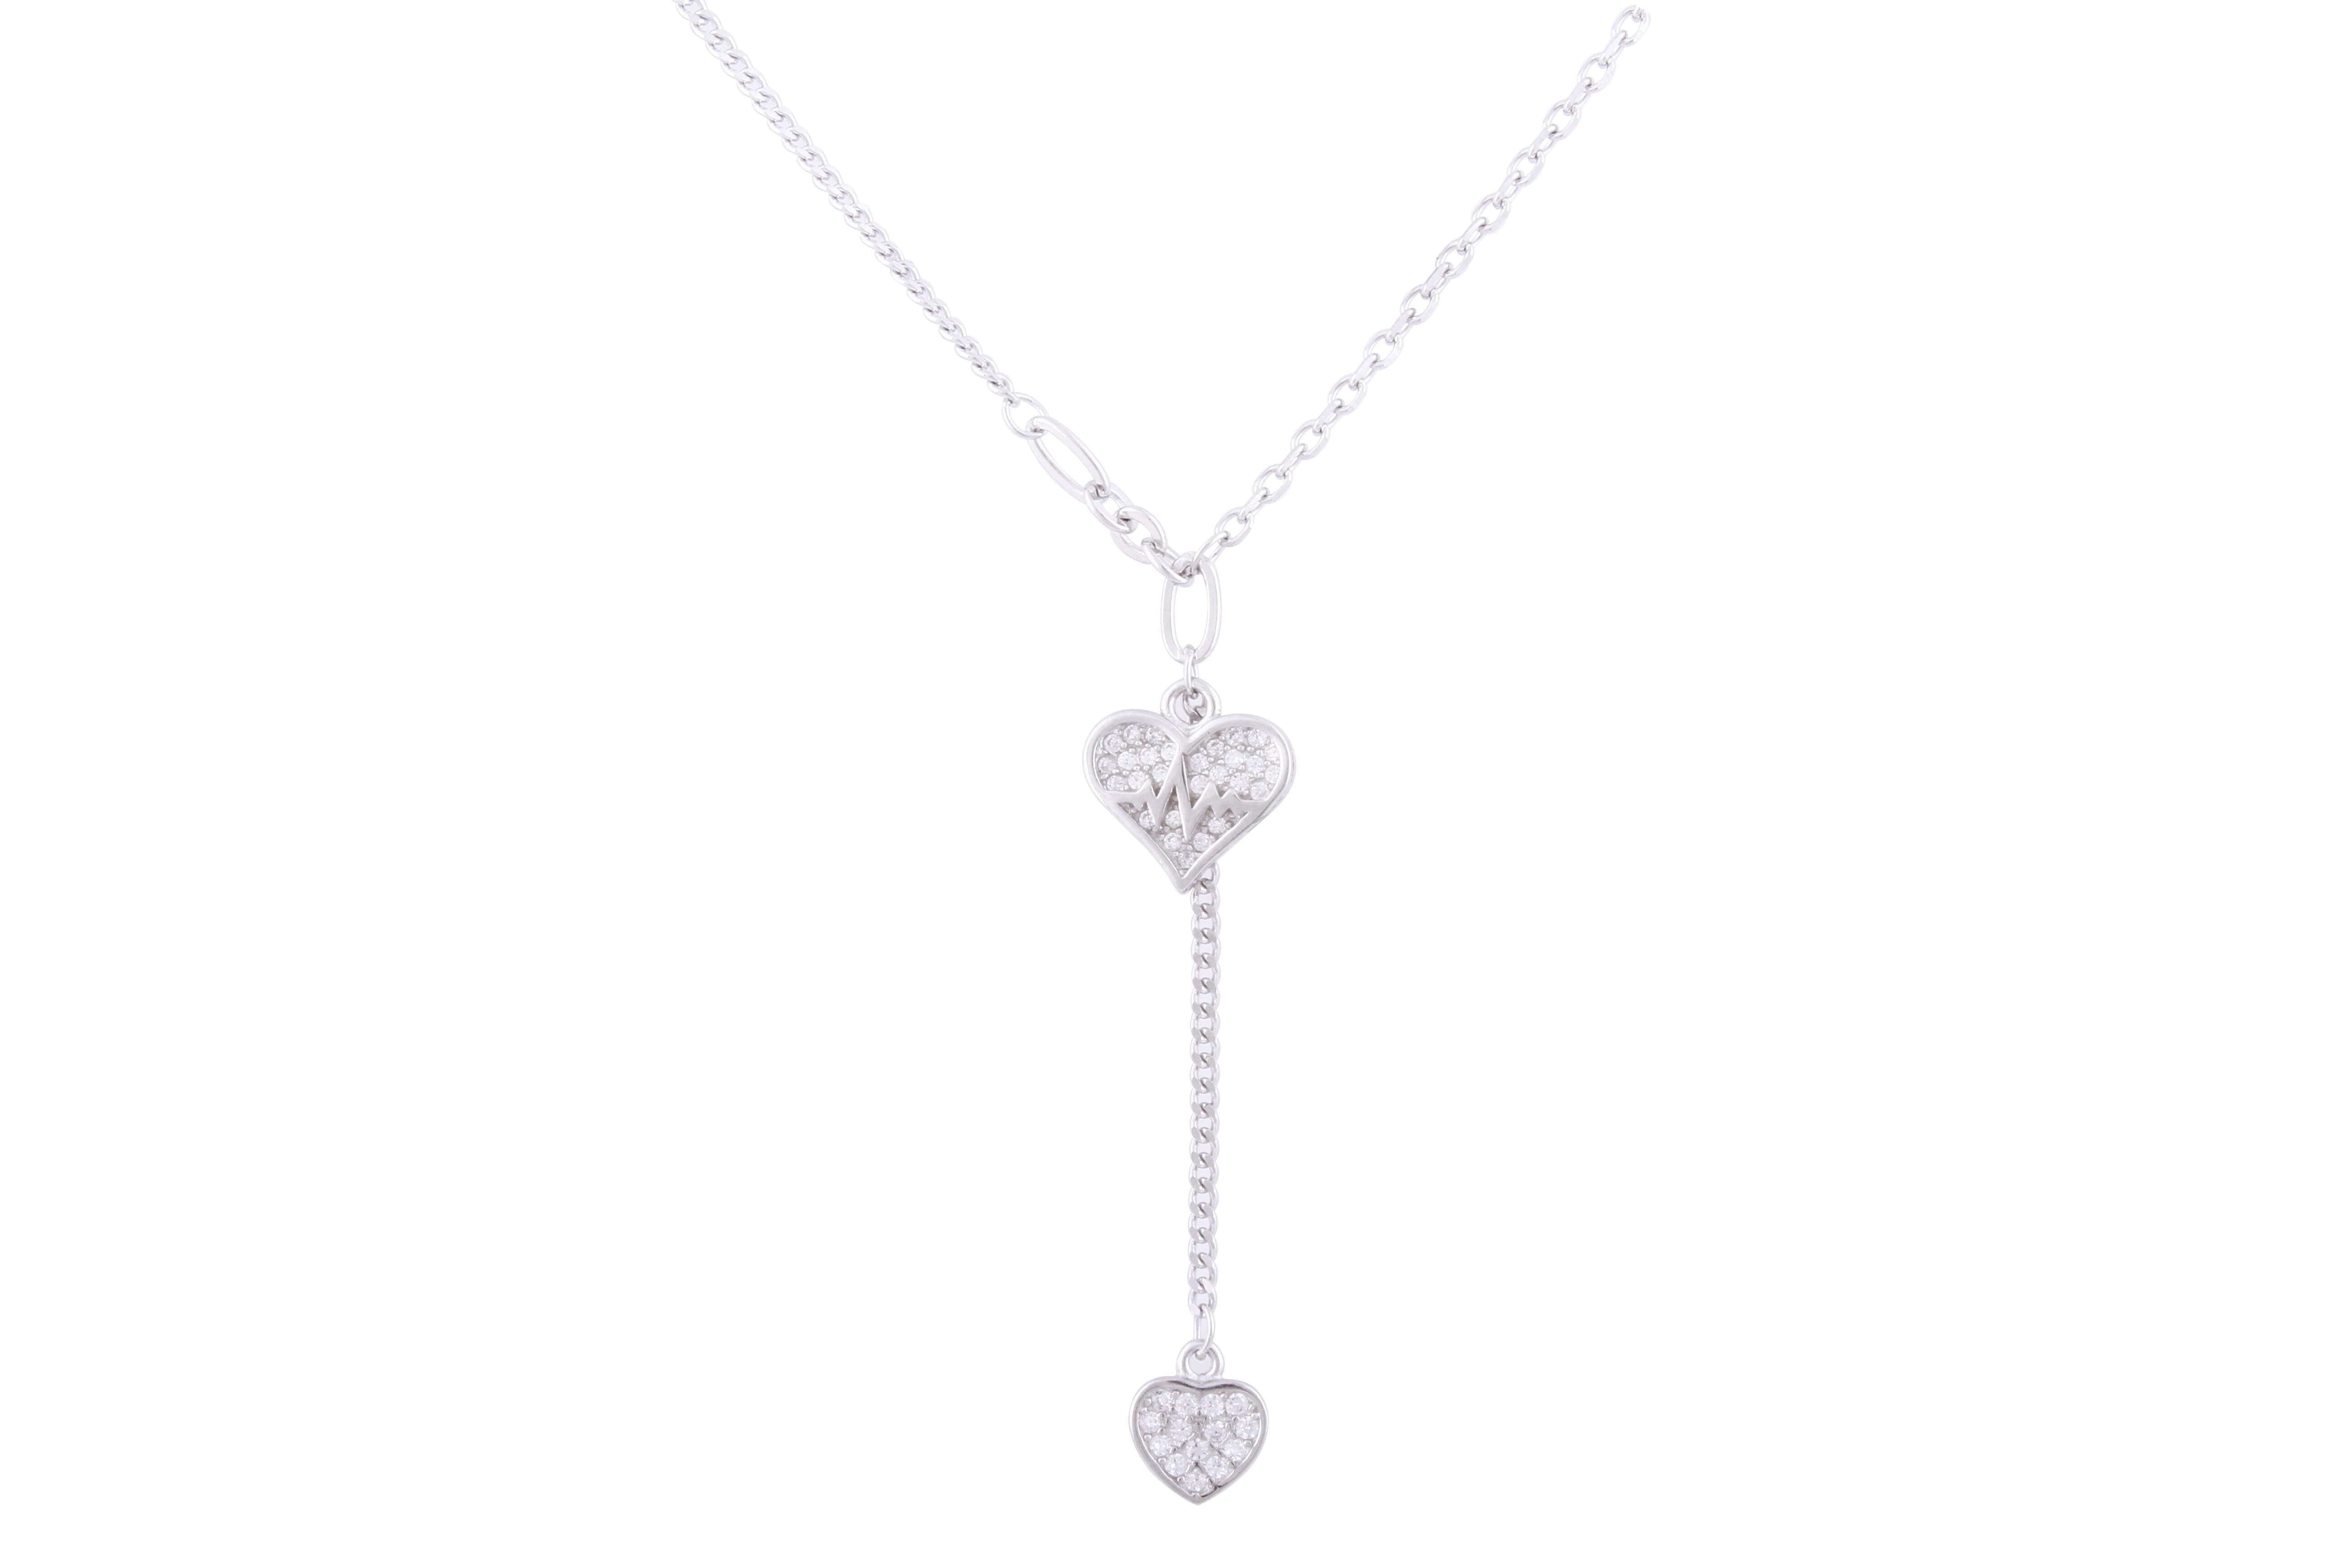 Asfour 925 Sterling Silver Necklace With Hearts Design Inlaid With Zircon Stones NR0502